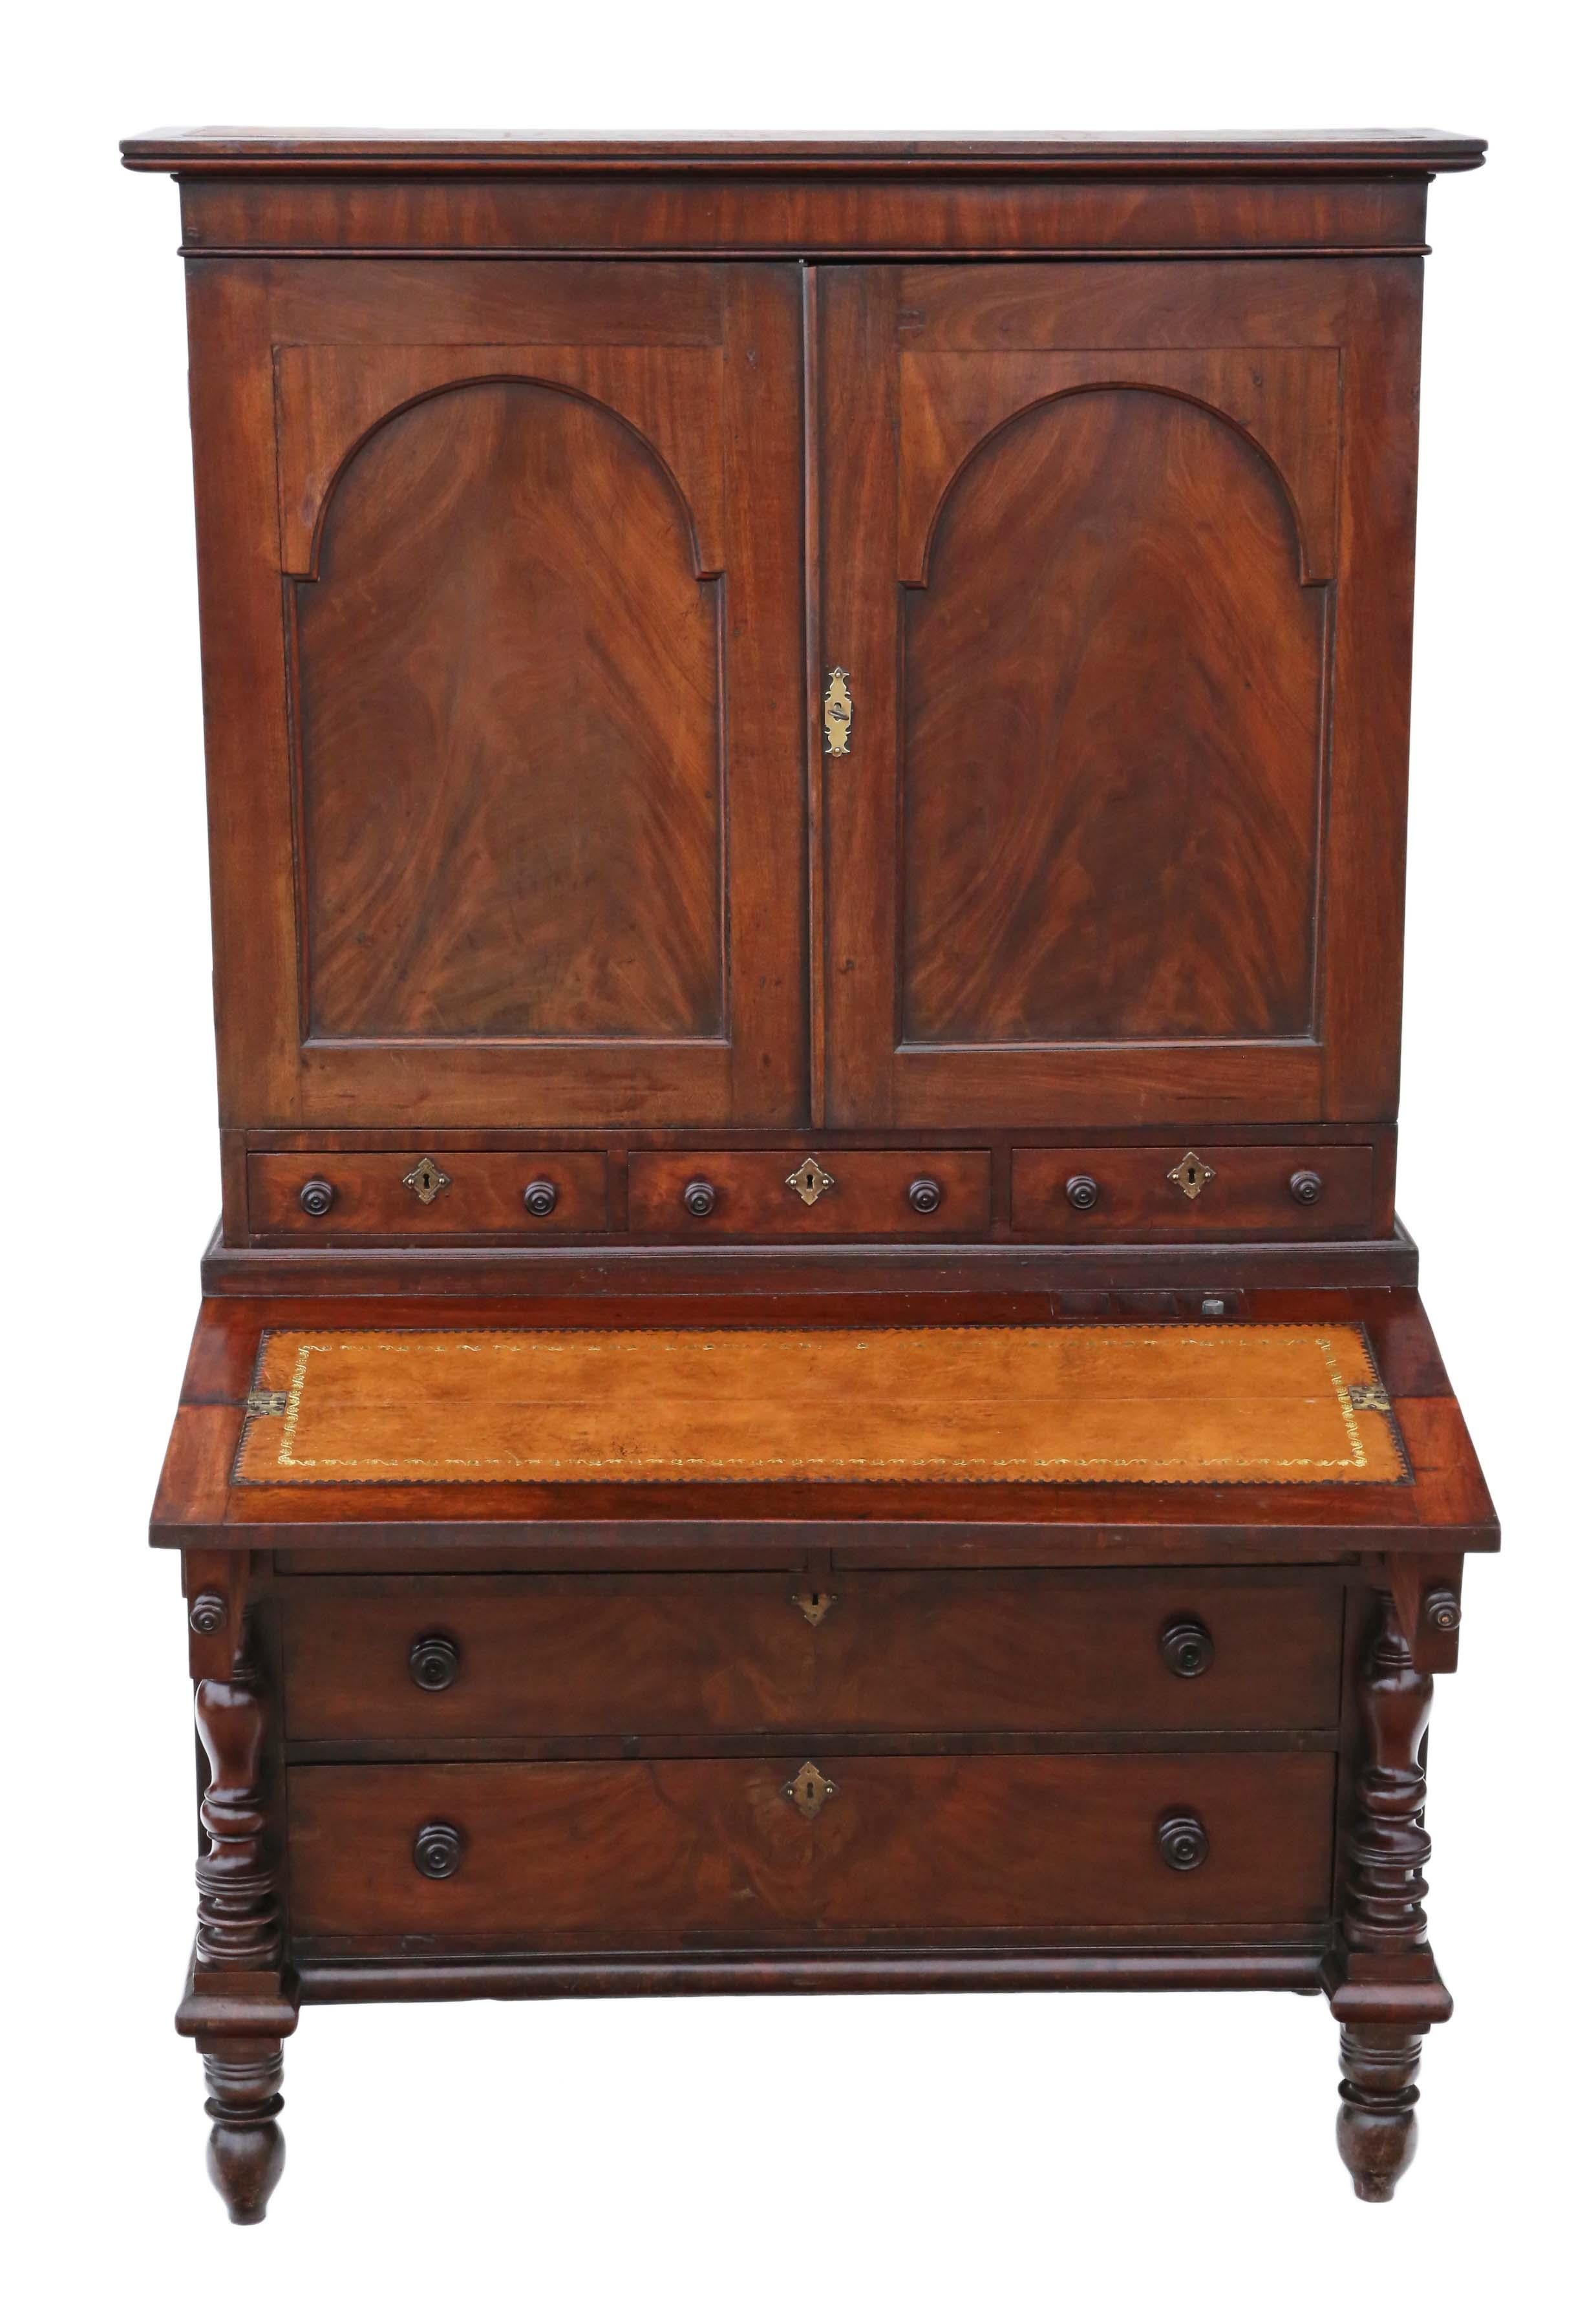 Georgian (George III, circa 1800) mahogany housekeeper's cupboard secretaire bookcase chest. Sometimes known as an estate cupboard. A wonderful rare quality period piece.
Solid and strong, with no loose joints. Full of age, character and